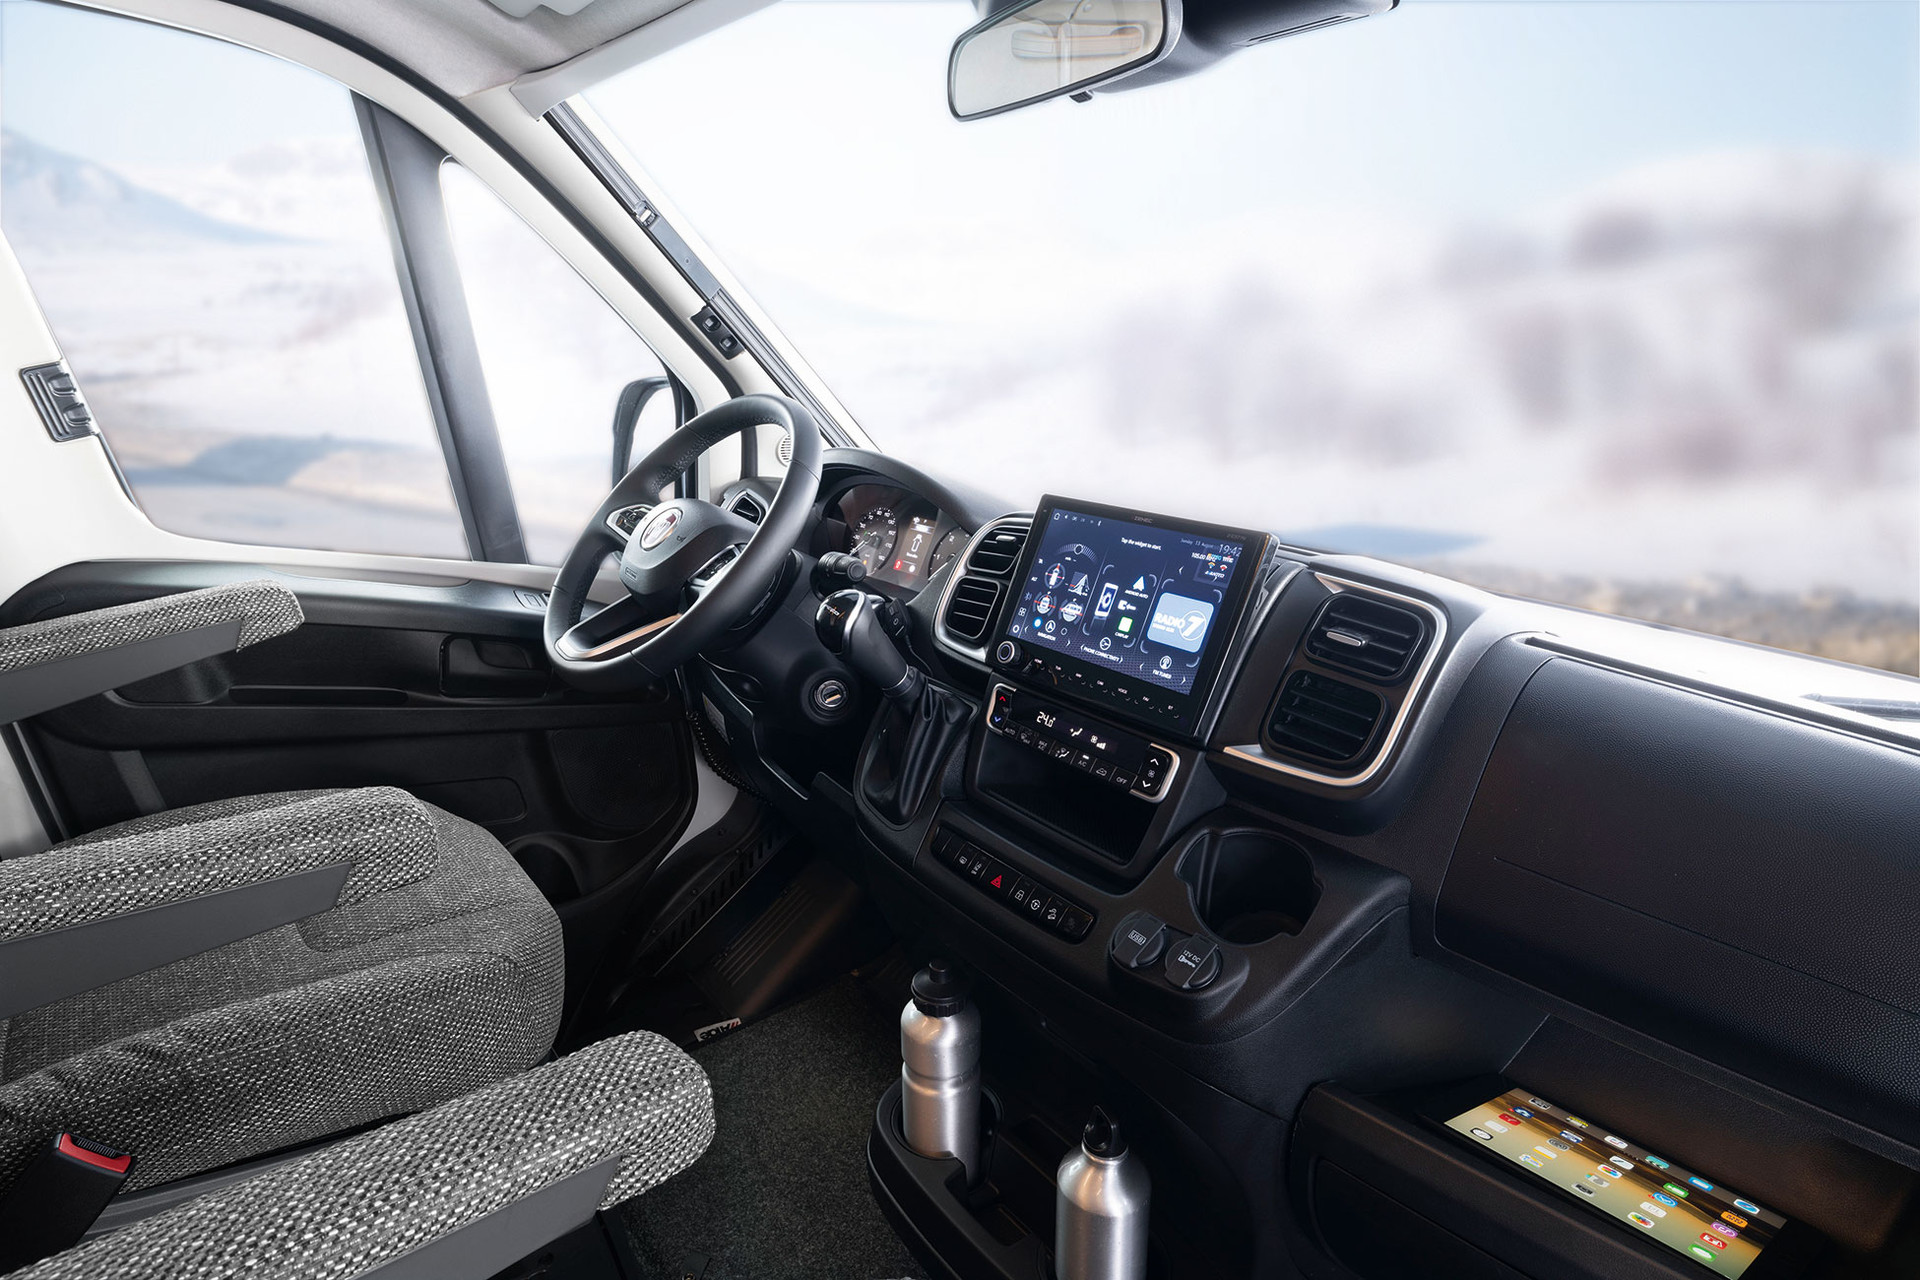 The standard naviceiver combines FM/DAB+ radio and a motorhome navigation system in one device. The 9-inch touchscreen, which also displays the image from the reversing cameras, provides a clear overview.